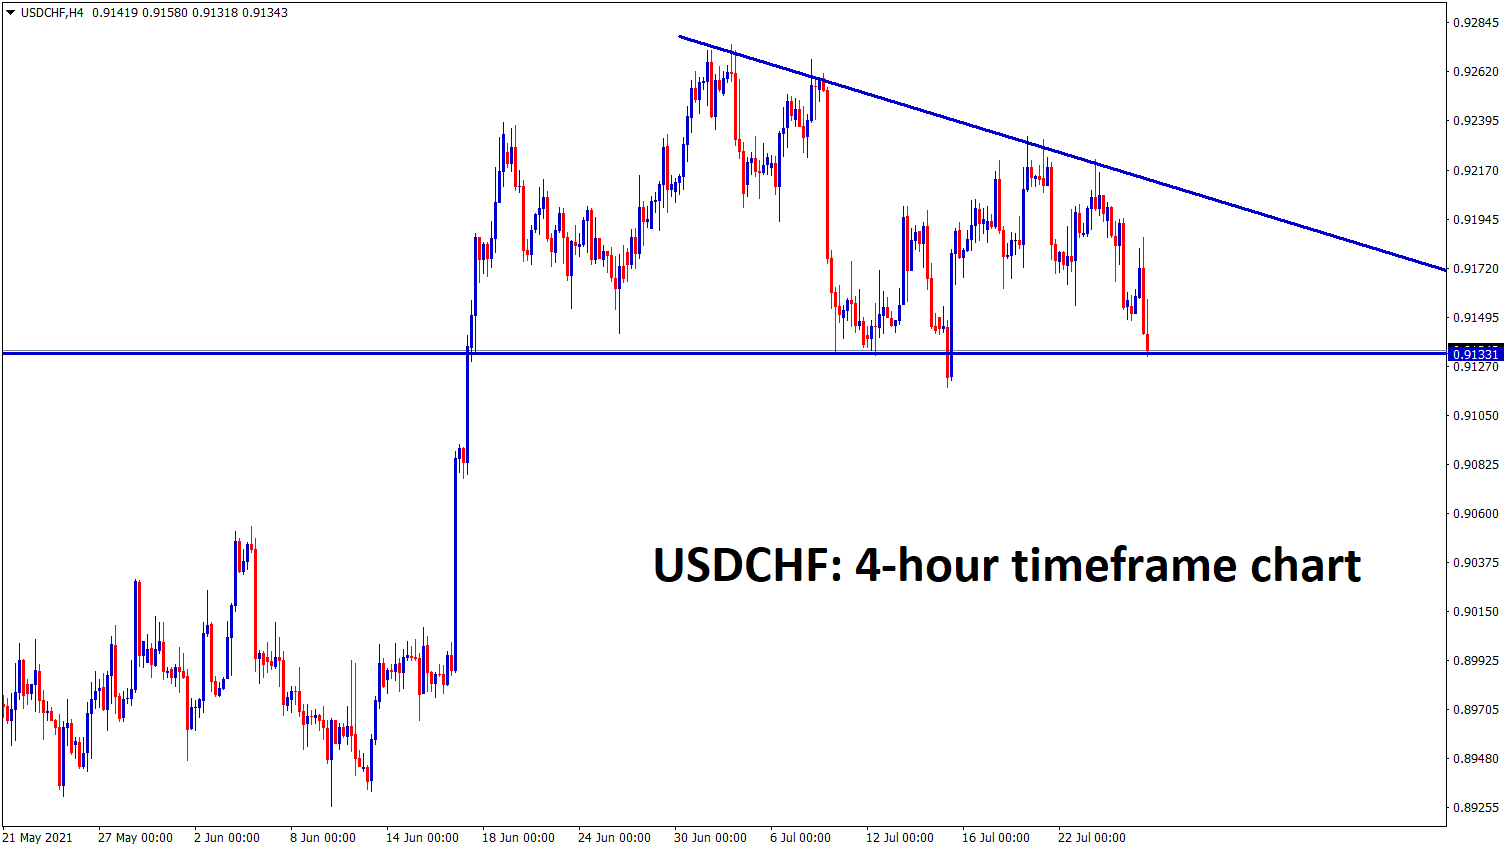 USDCHF has formed a descending Triangle pattern in h4